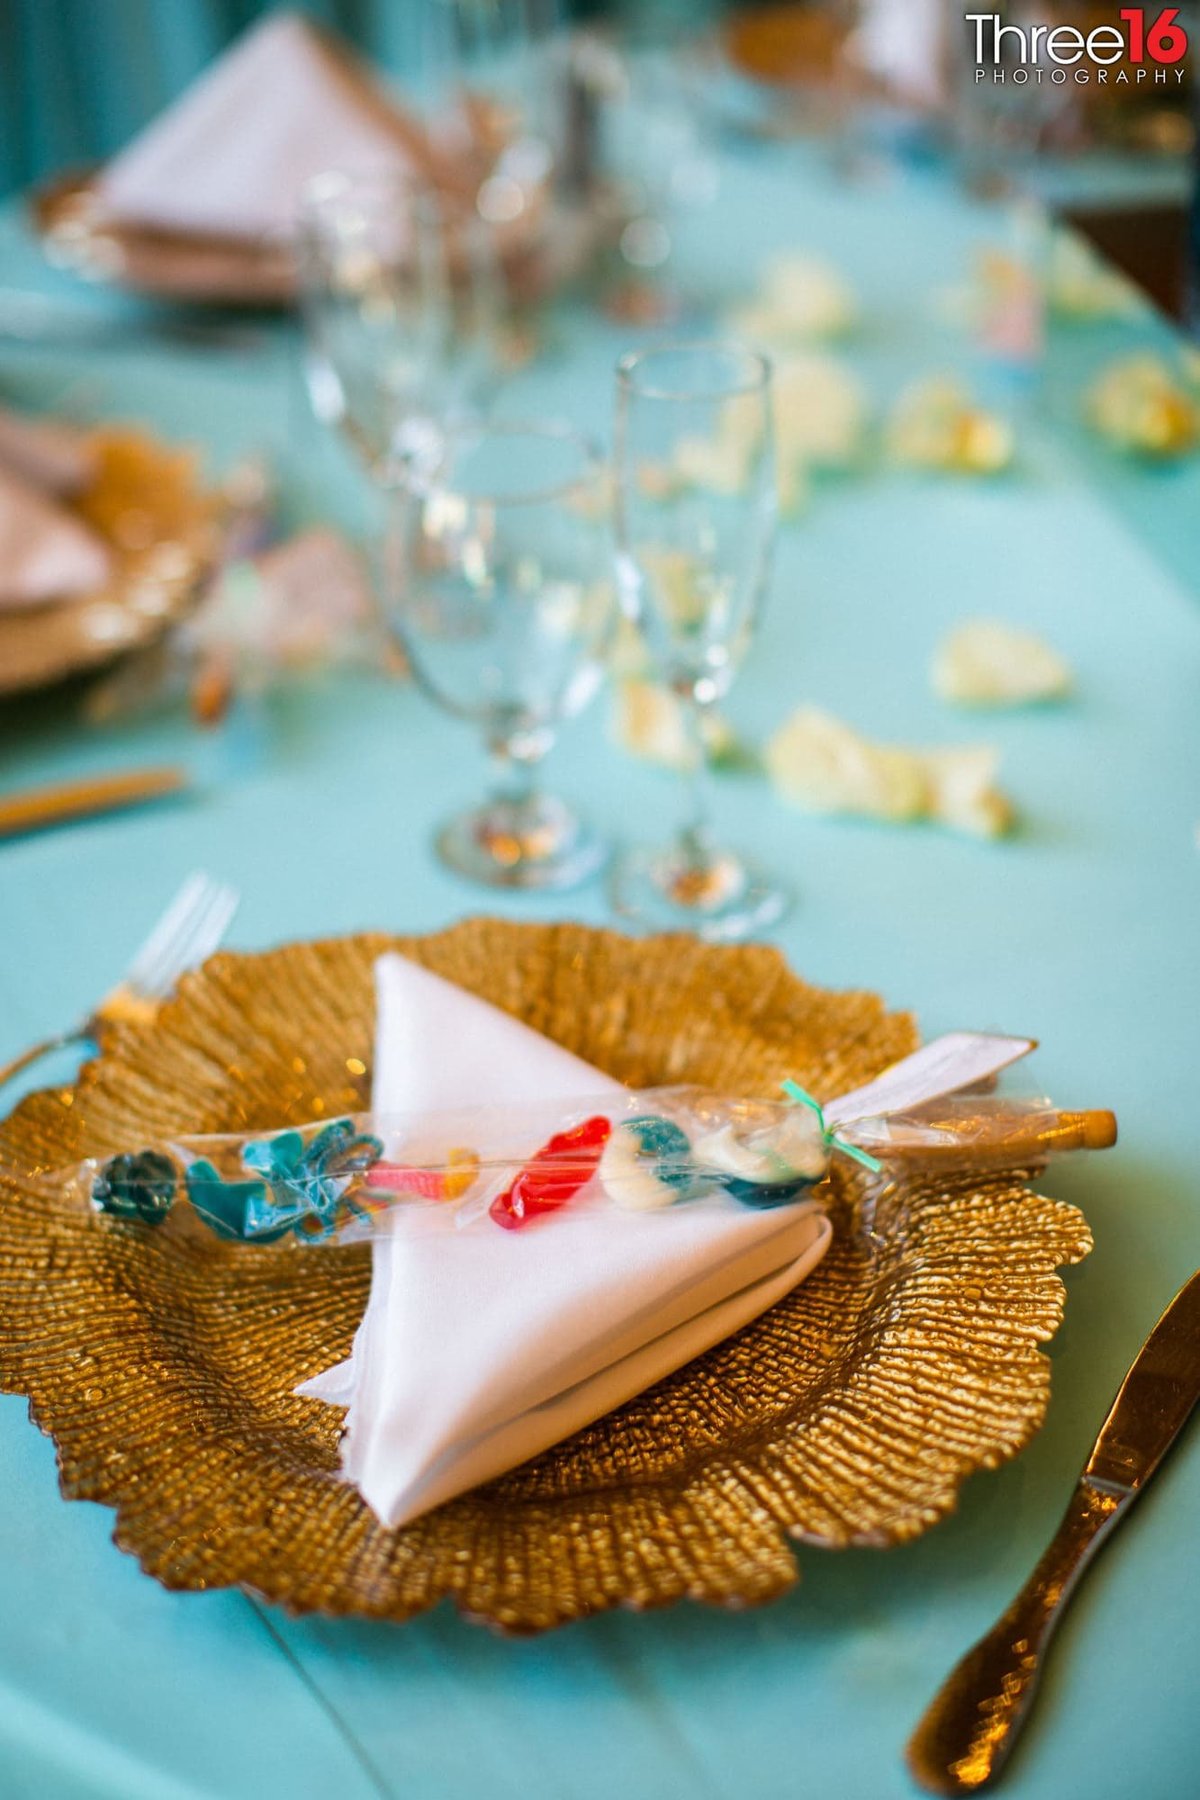 Plate setting at a wedding reception table